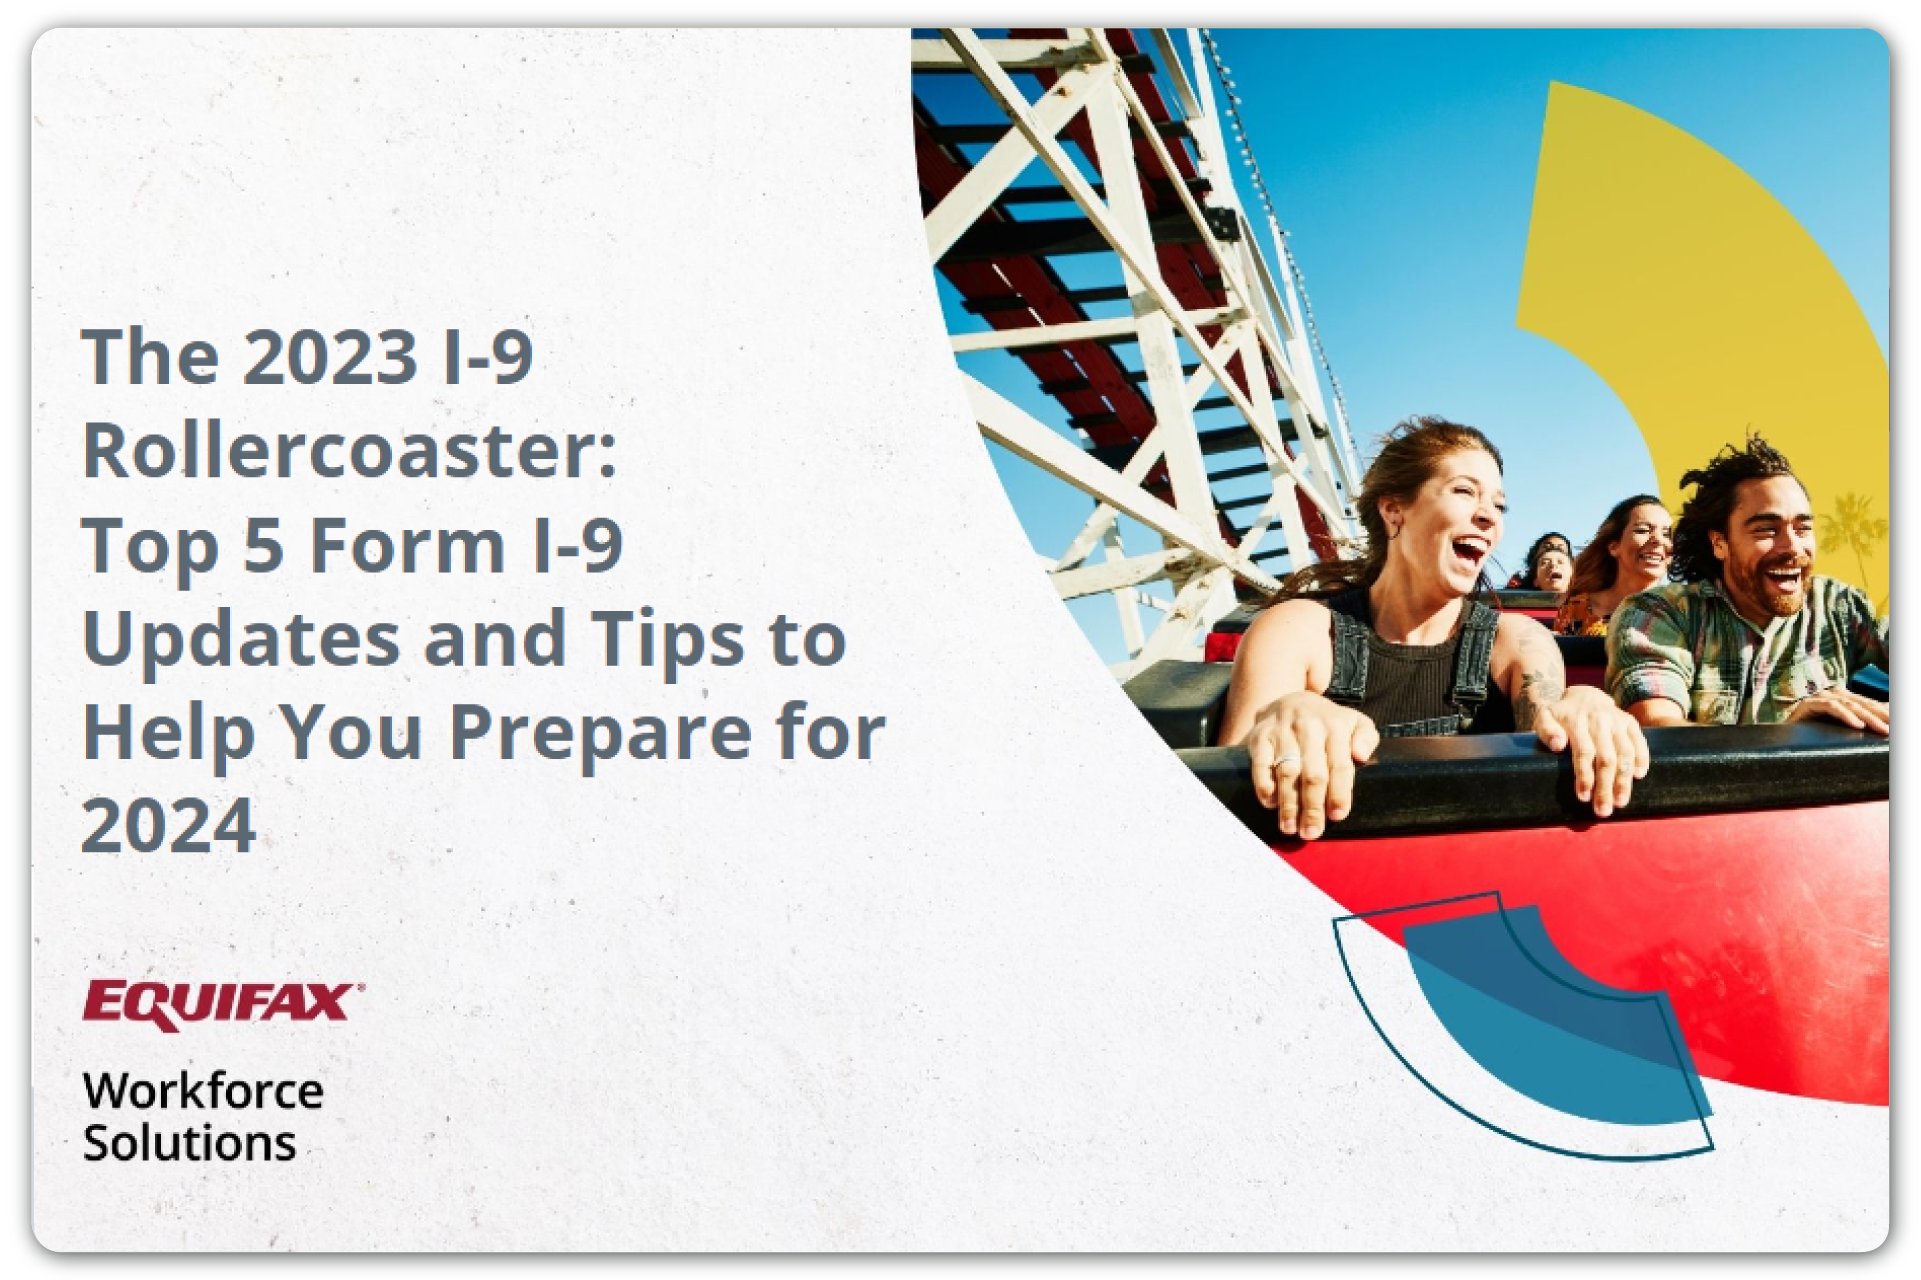 The 2023 I-9 Rollercoaster: Top 5 Form I-9 Updates and Tips to Help You Prepare for 2024 Image